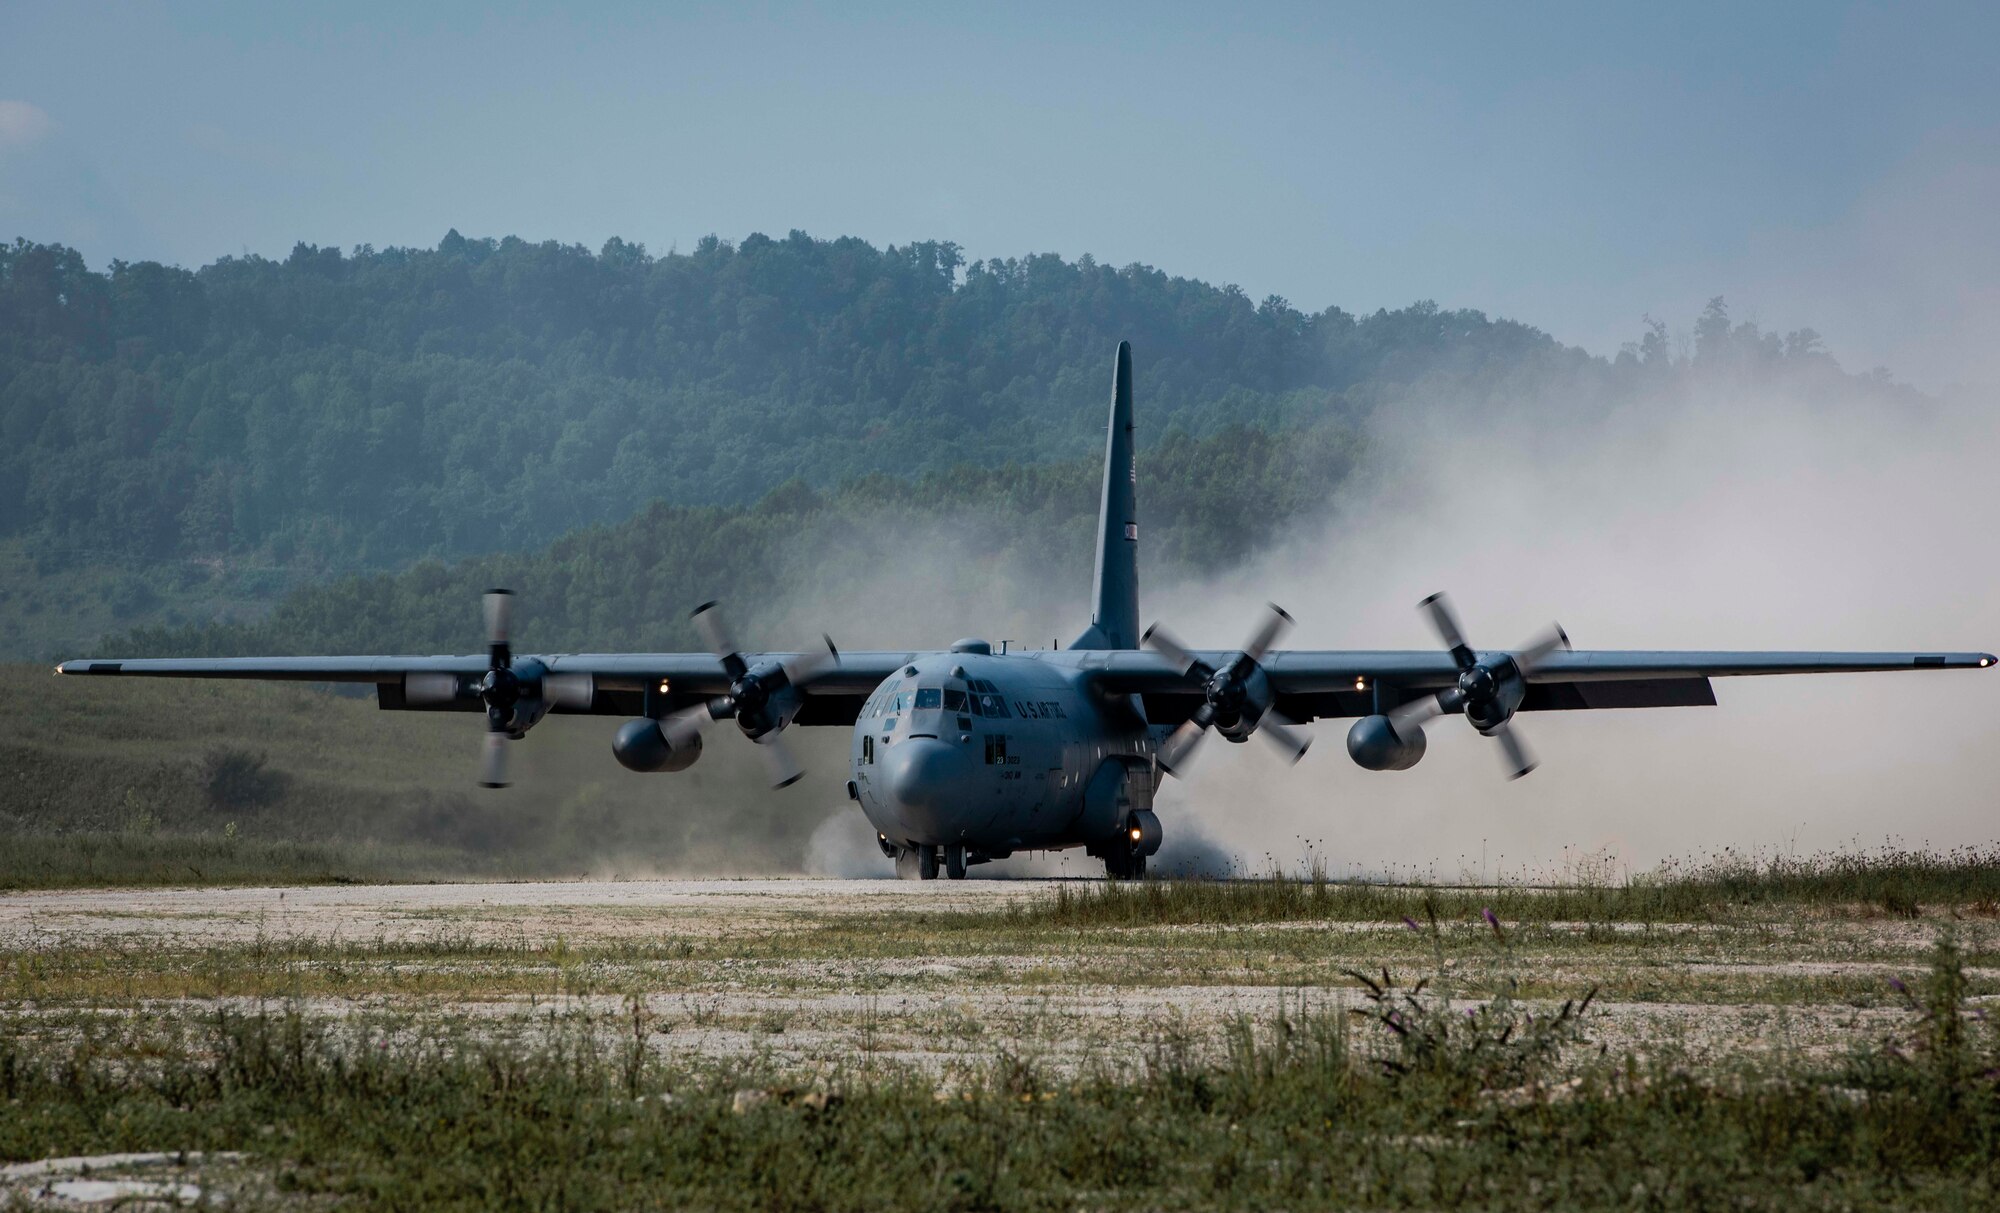 A U.S. Air Force Reserve aircrew from the 757th Airlift Squadron, Youngstown Air Reserve Station, Ohio, land a C-130H Hercules on a dirt landing zone during the distributed operations training event near Charleston, West Virginia, Aug. 25, 2020. The training event tested aircrew on their tactical combat airlift skills such as cargo airdrop, formation flights, and personnel delivery in a contested environment. There were a total of eight aircraft from various Reserve and Guard units supporting the training effort, enabling strategic depth and readiness for the force.